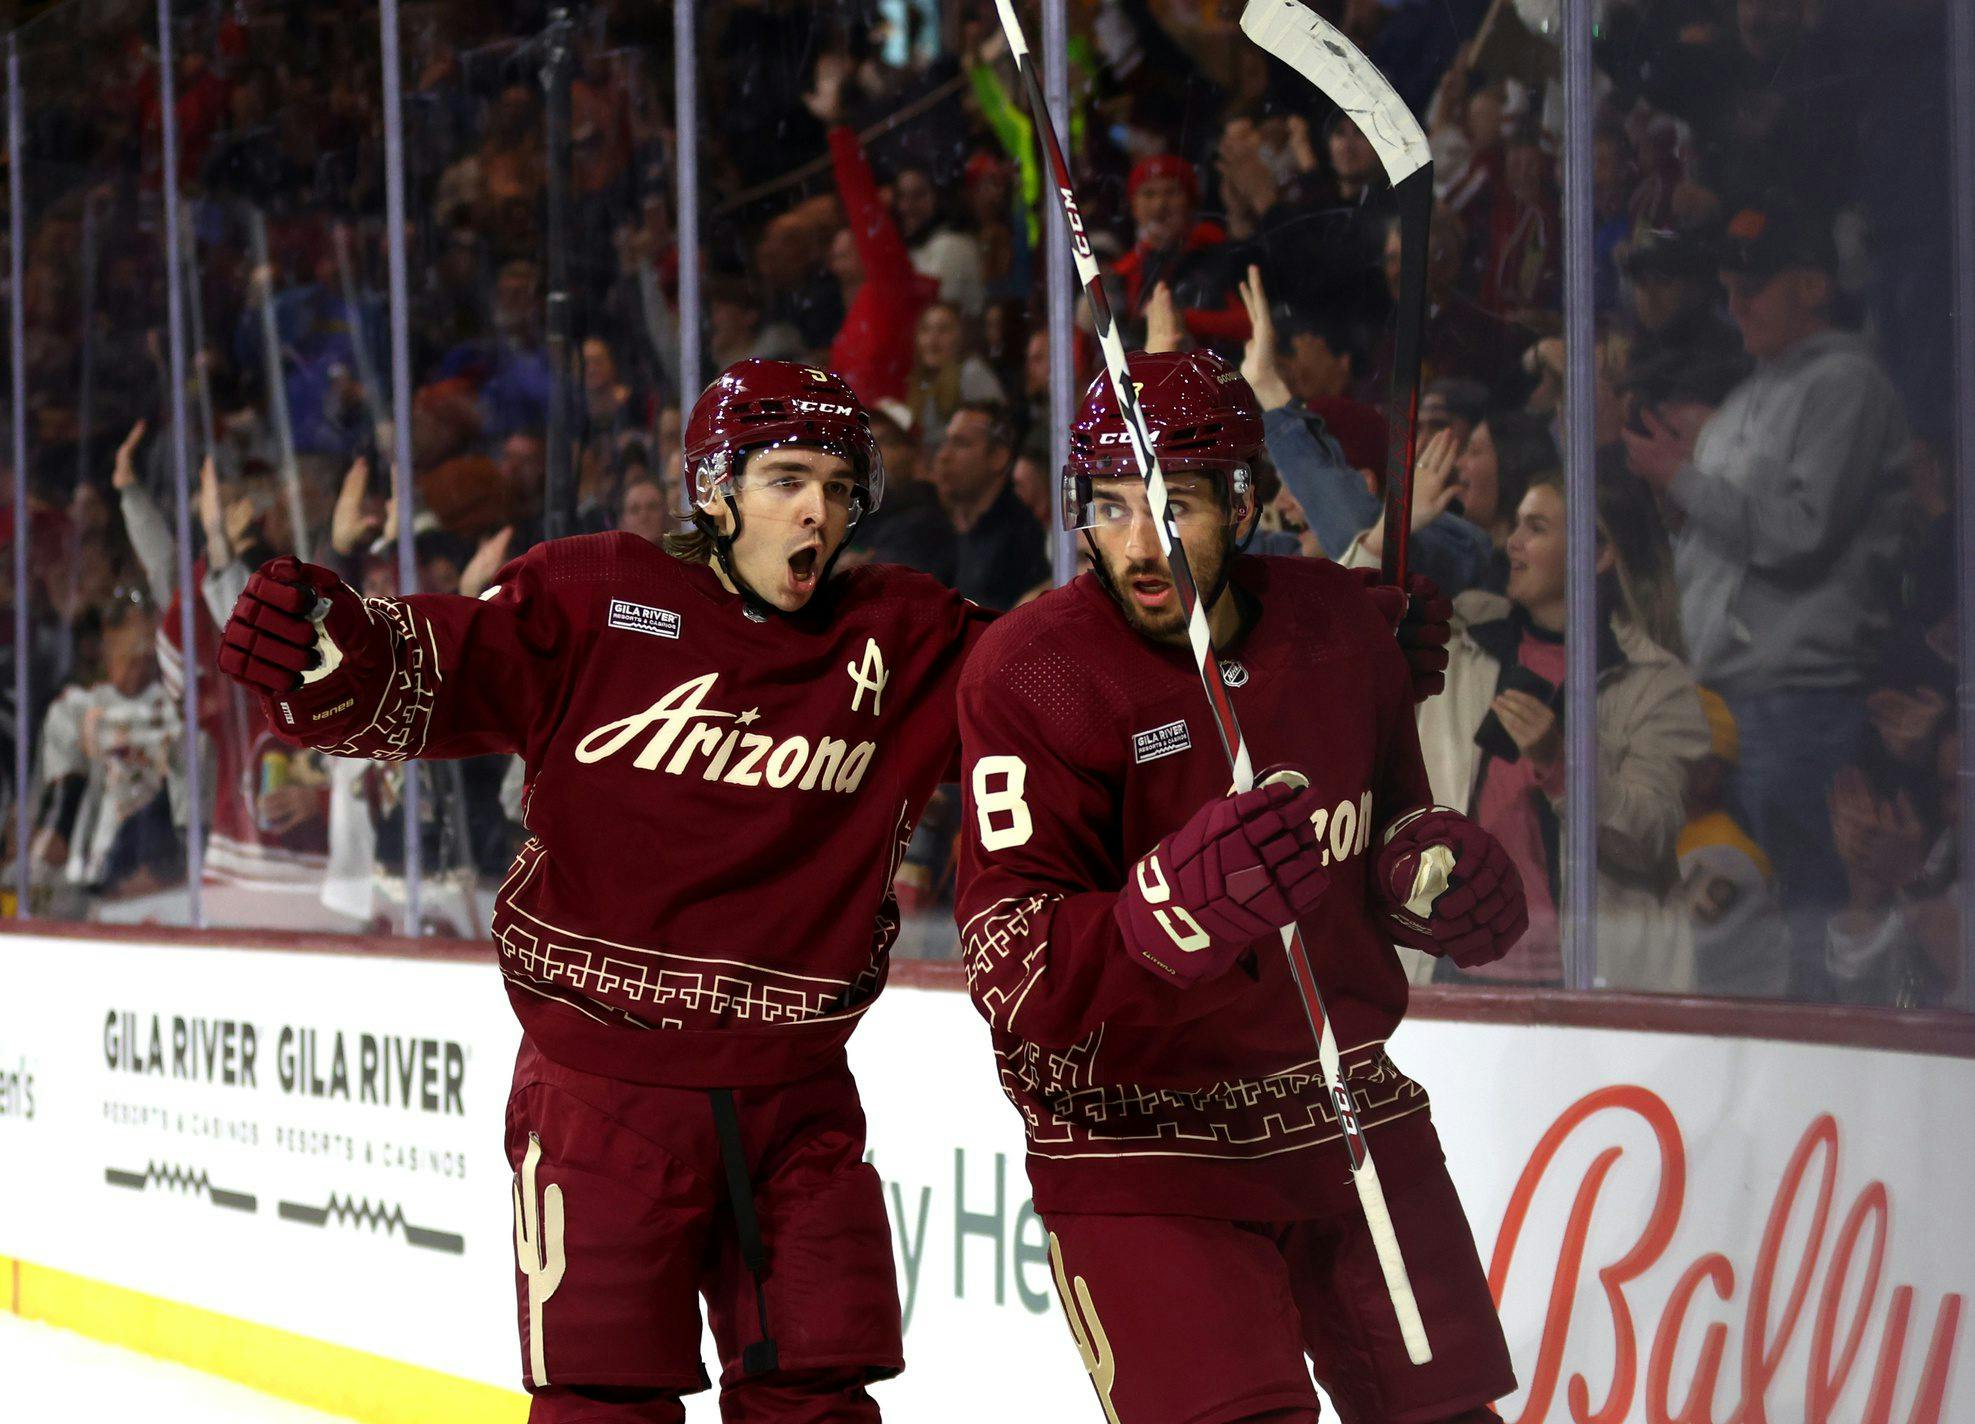 The Arizona Coyotes’ top line of Keller, Schmaltz, and Hayton is one of the NHL’s best